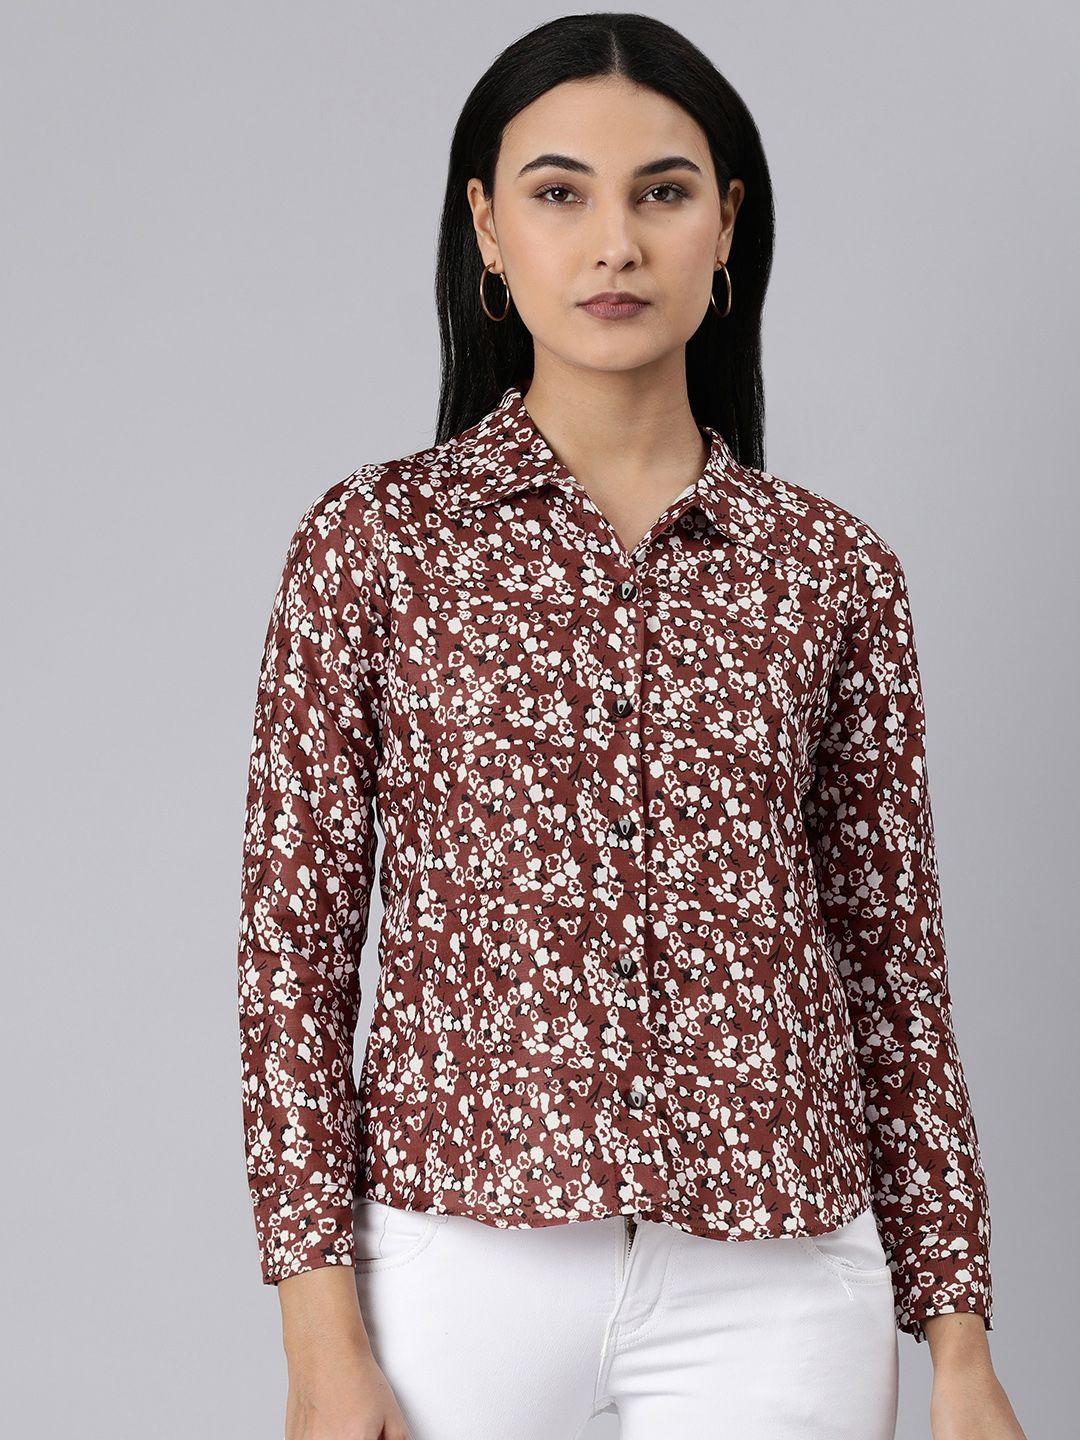 westhood original floral opaque printed pure cotton casual shirt